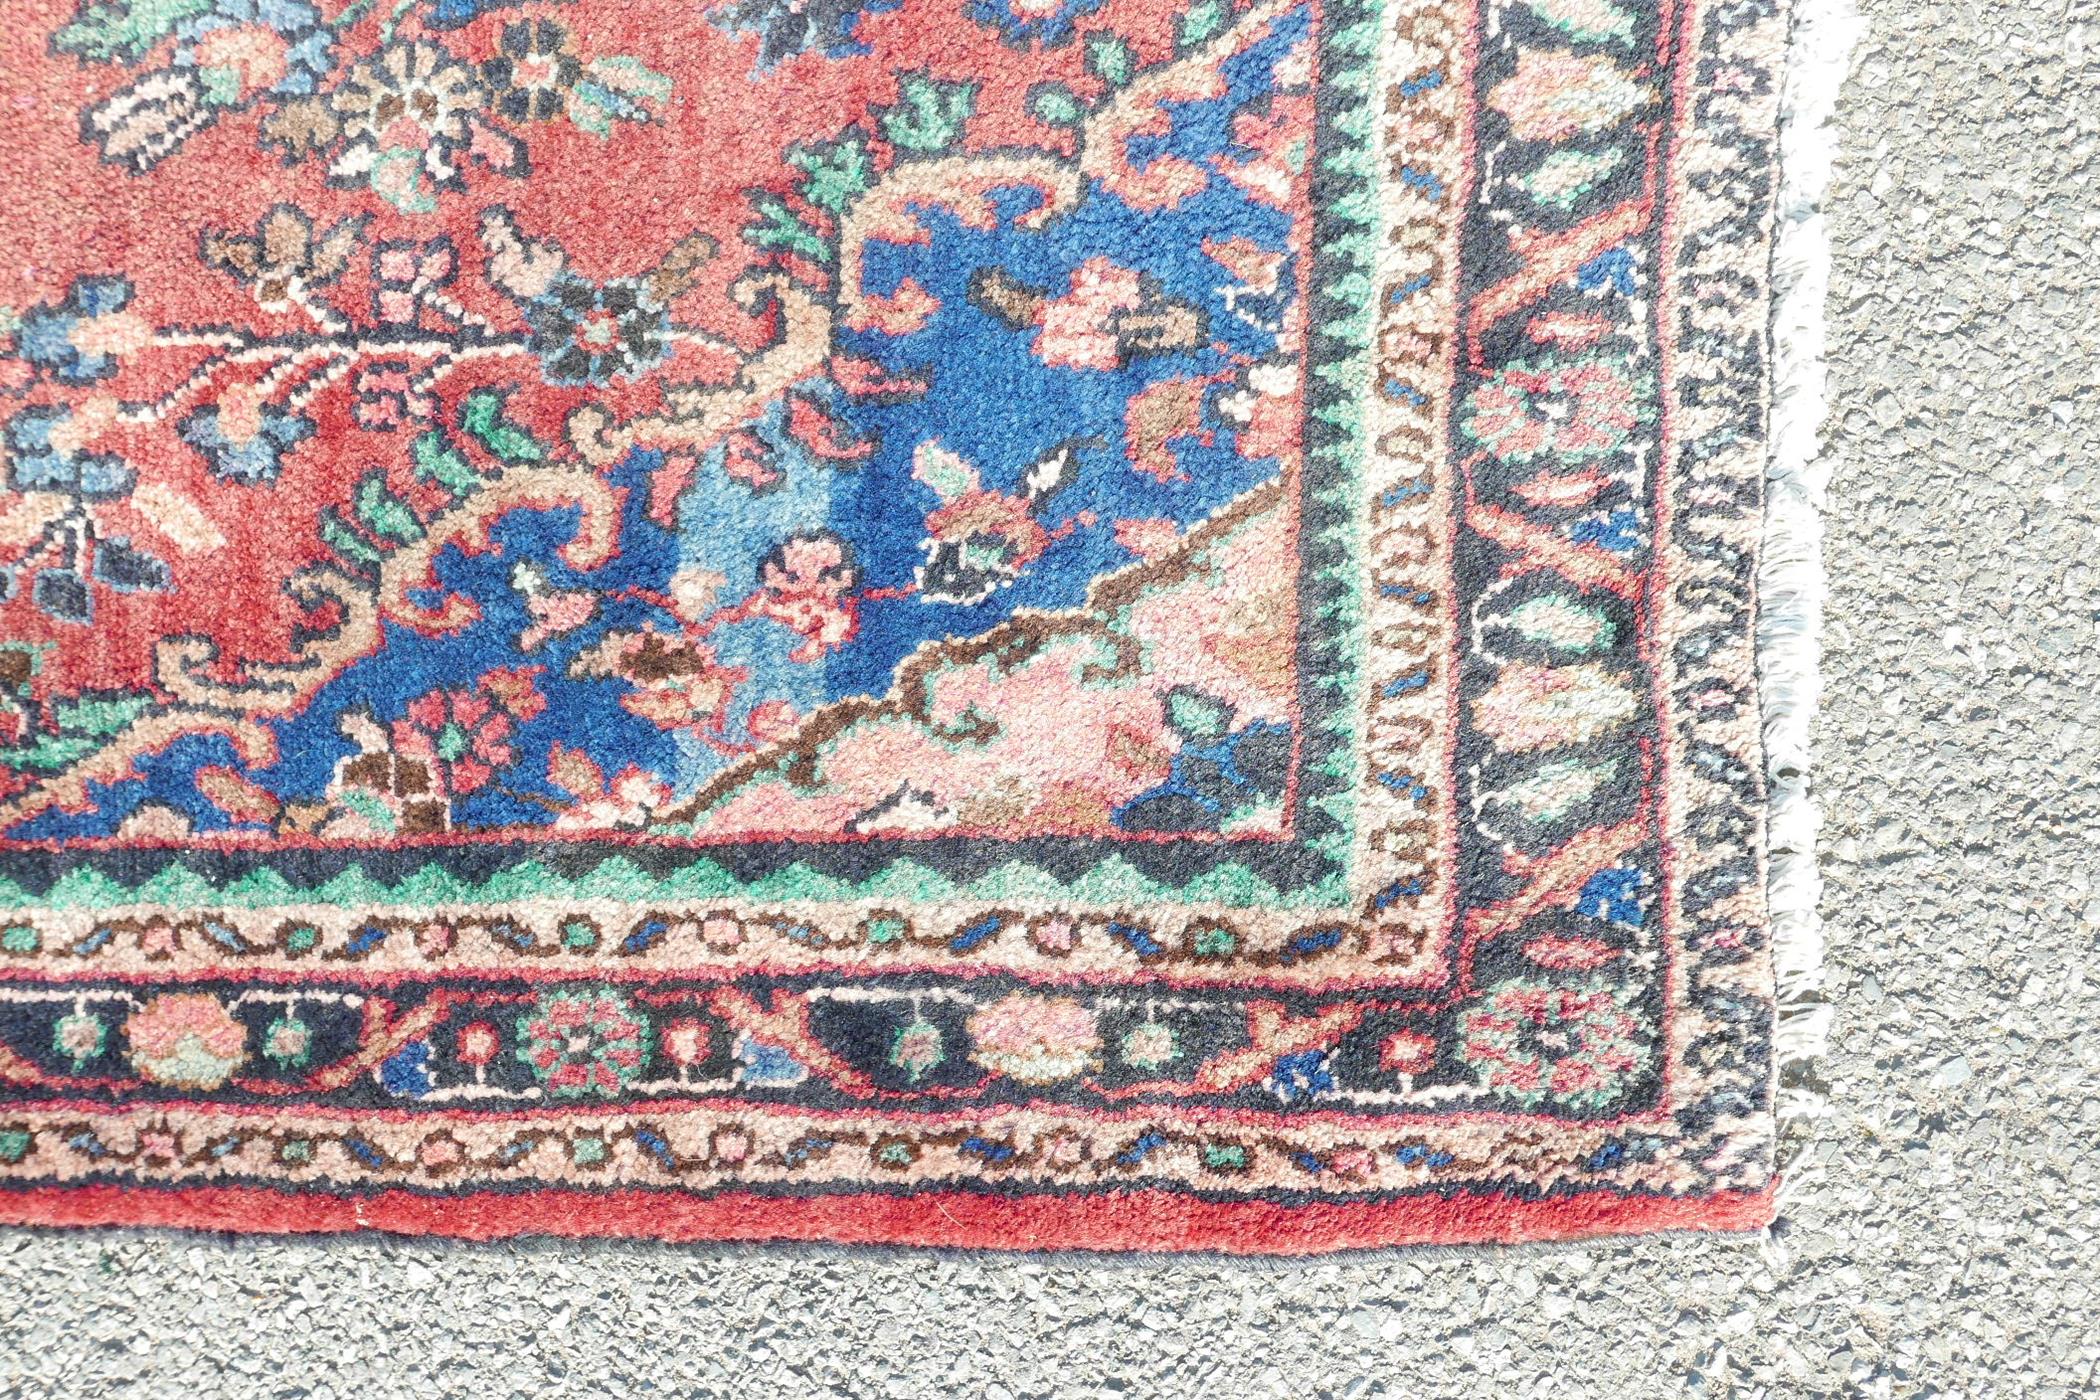 A full pile Sarouk runner with a traditional design on a red ground, 46" x 123" - Image 3 of 4